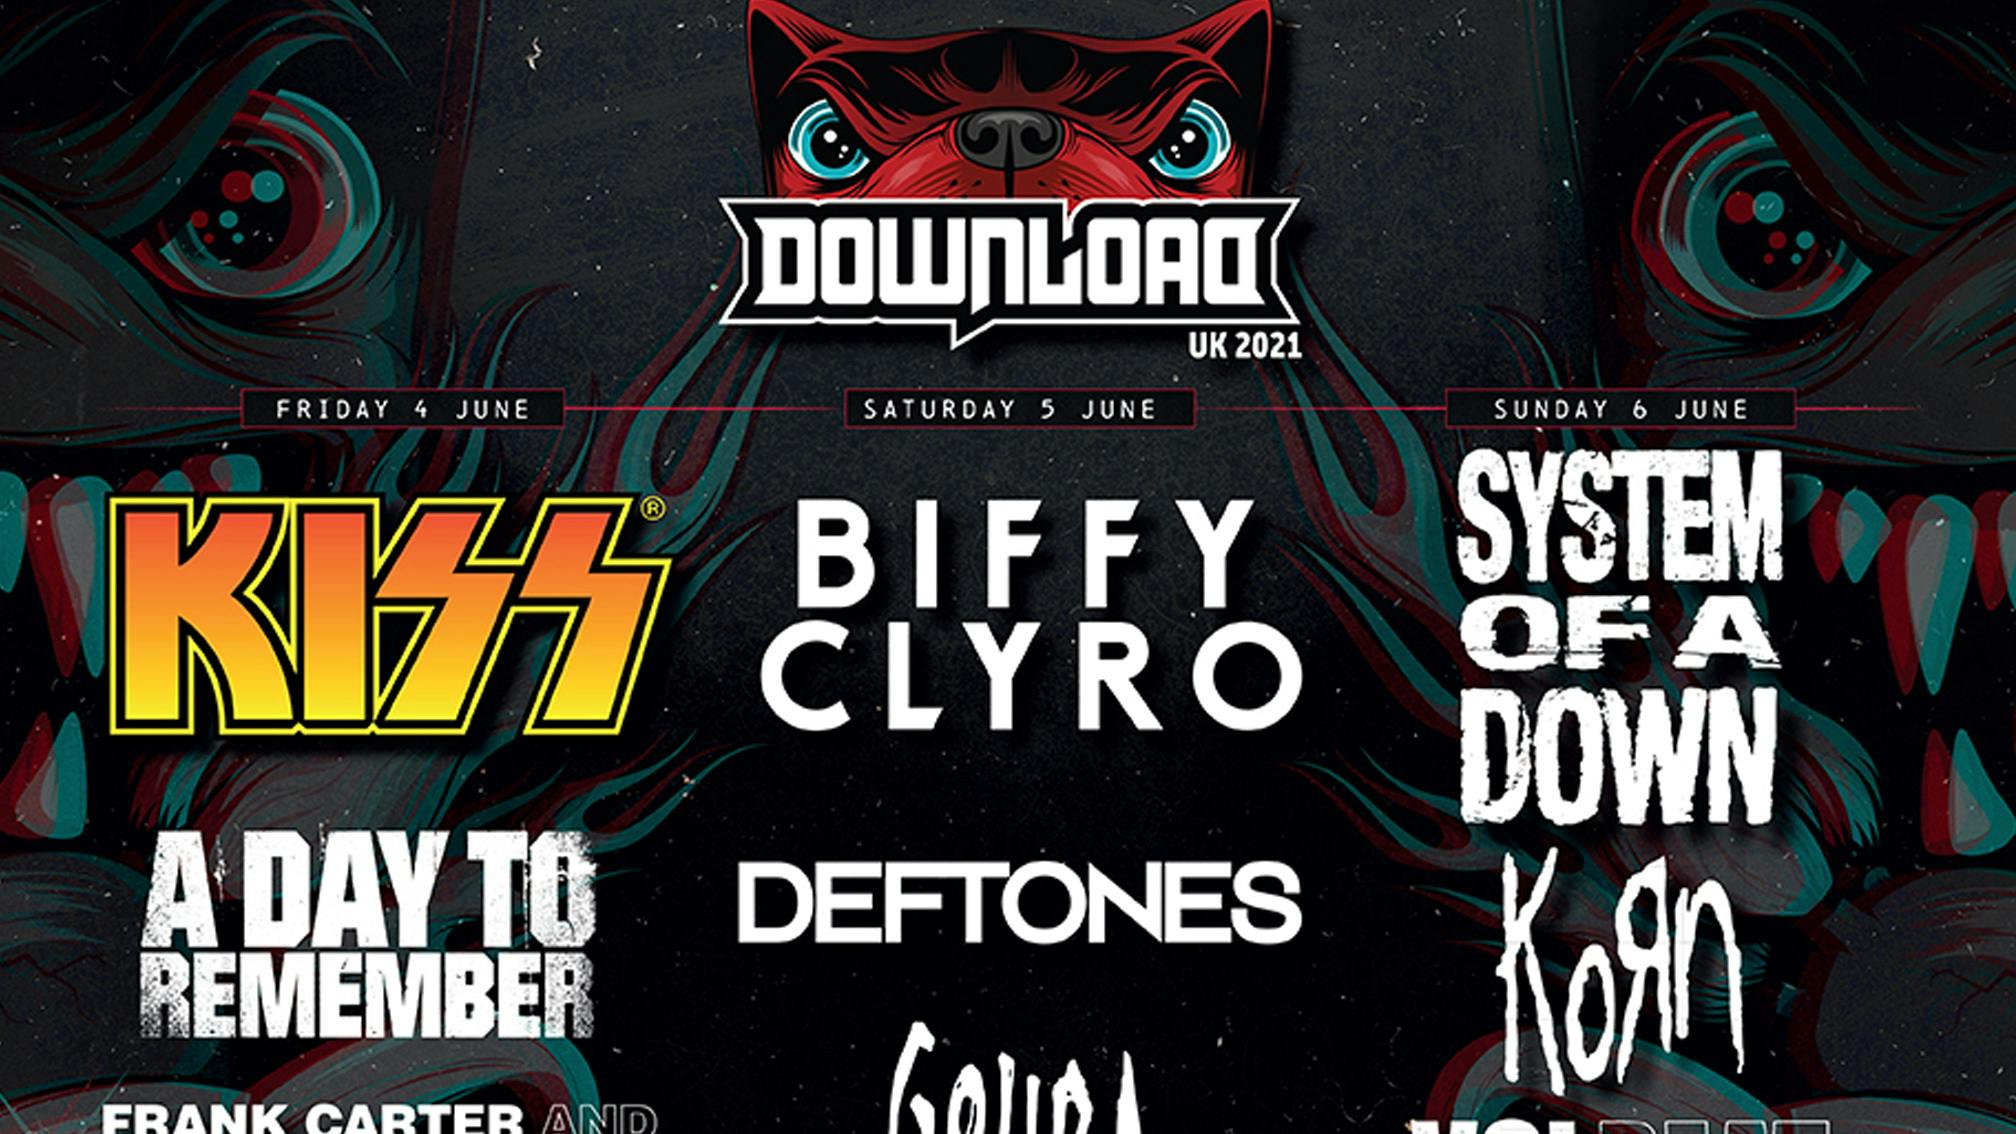 Download Festival Announce 2021 Headliners, Plus Over 70 More Bands